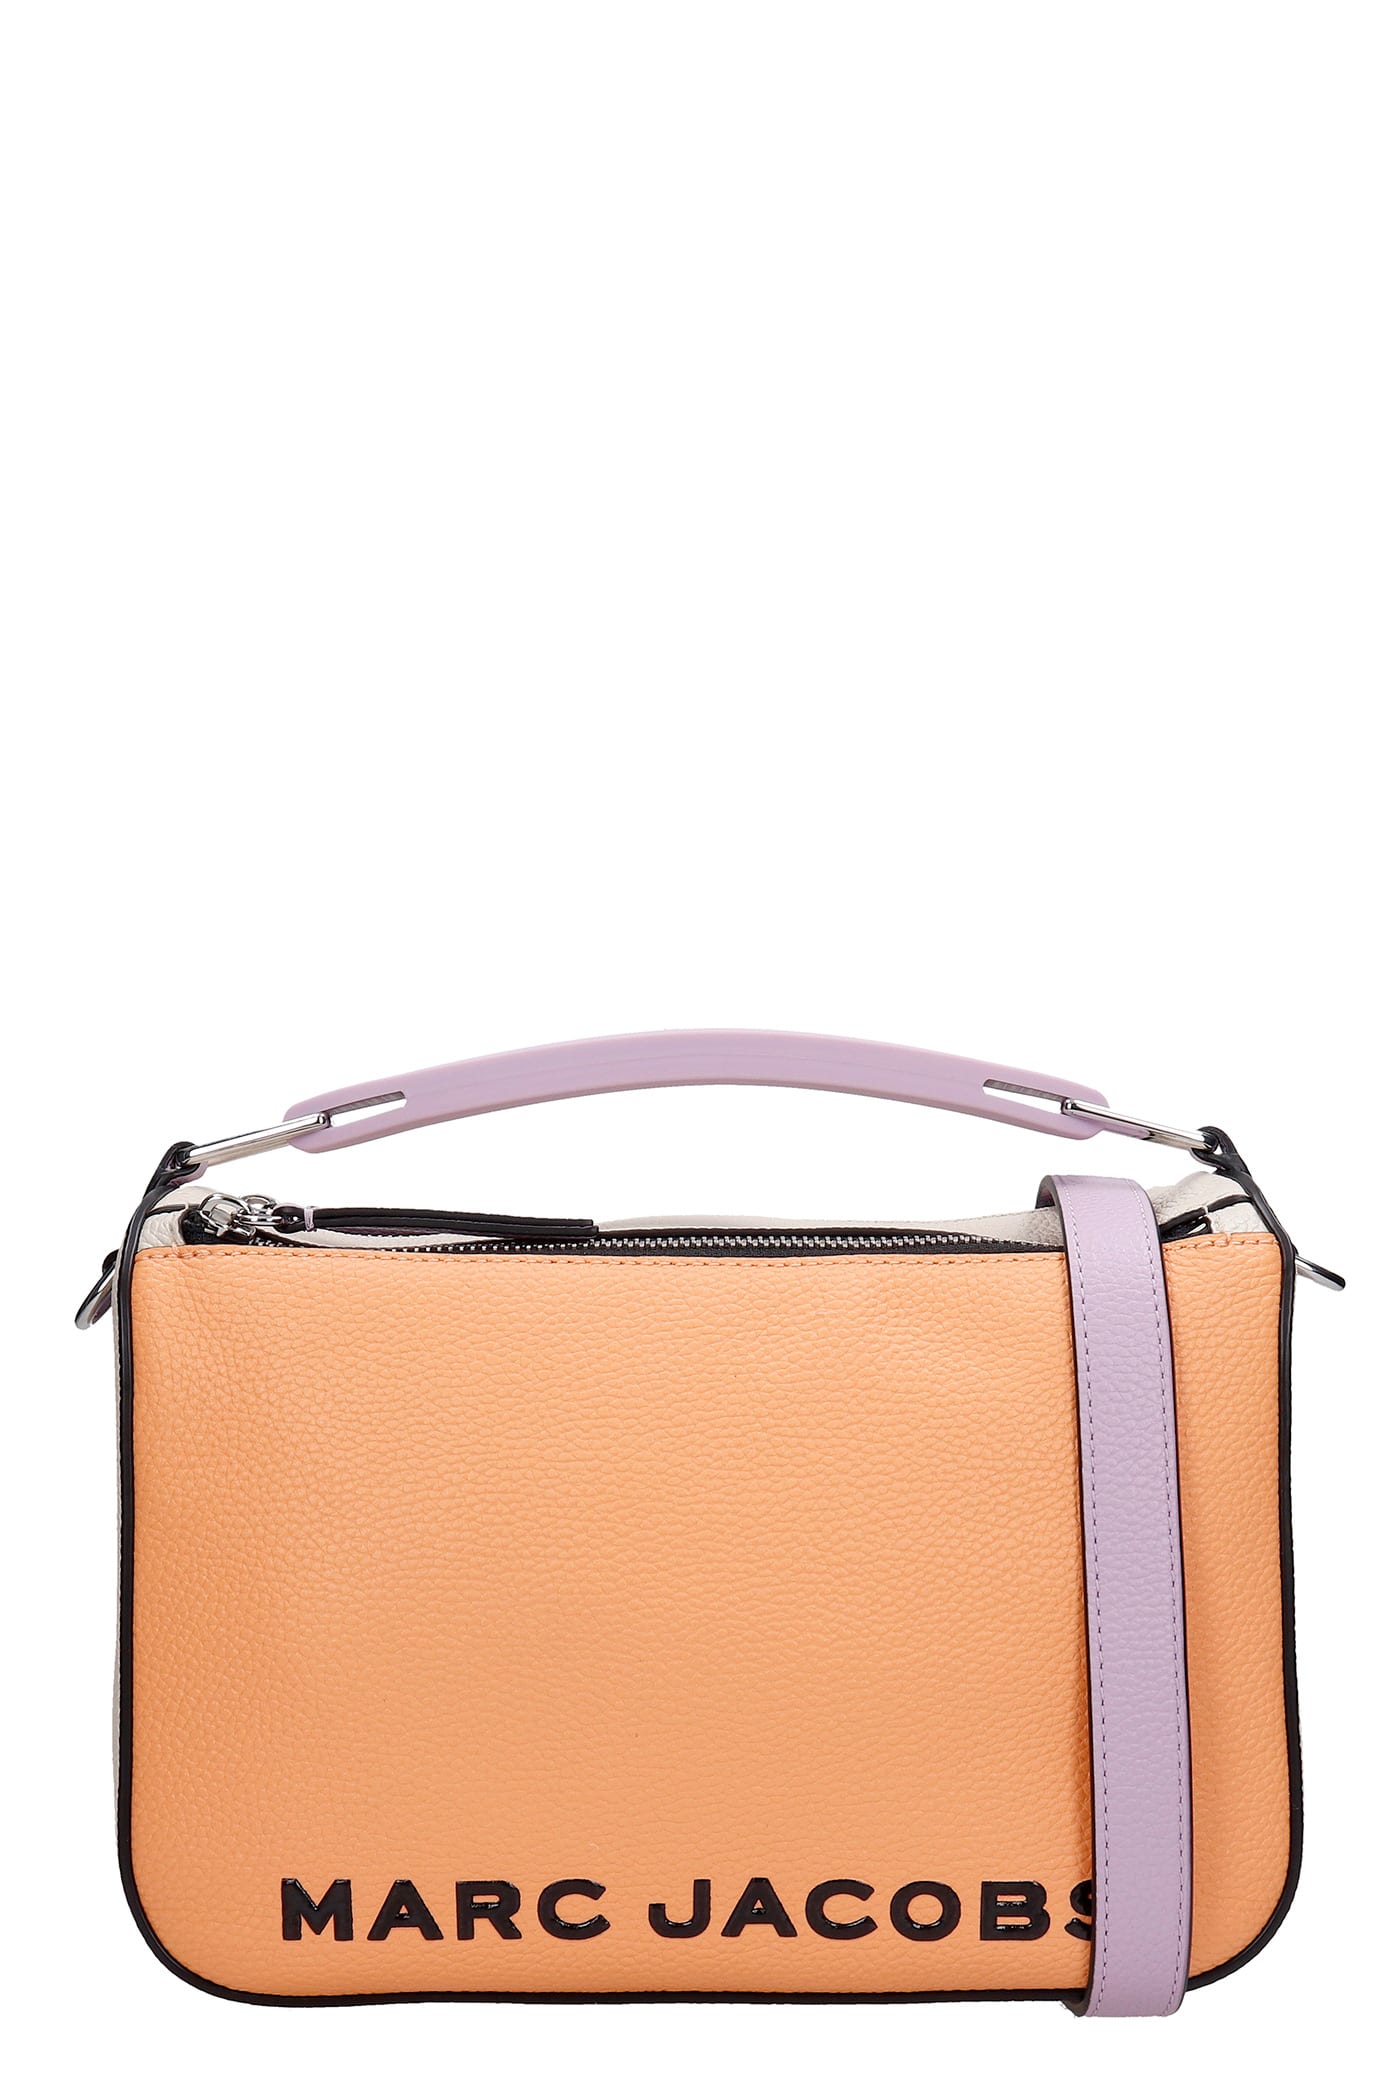 Marc Jacobs Hand Bag In Orange Leather